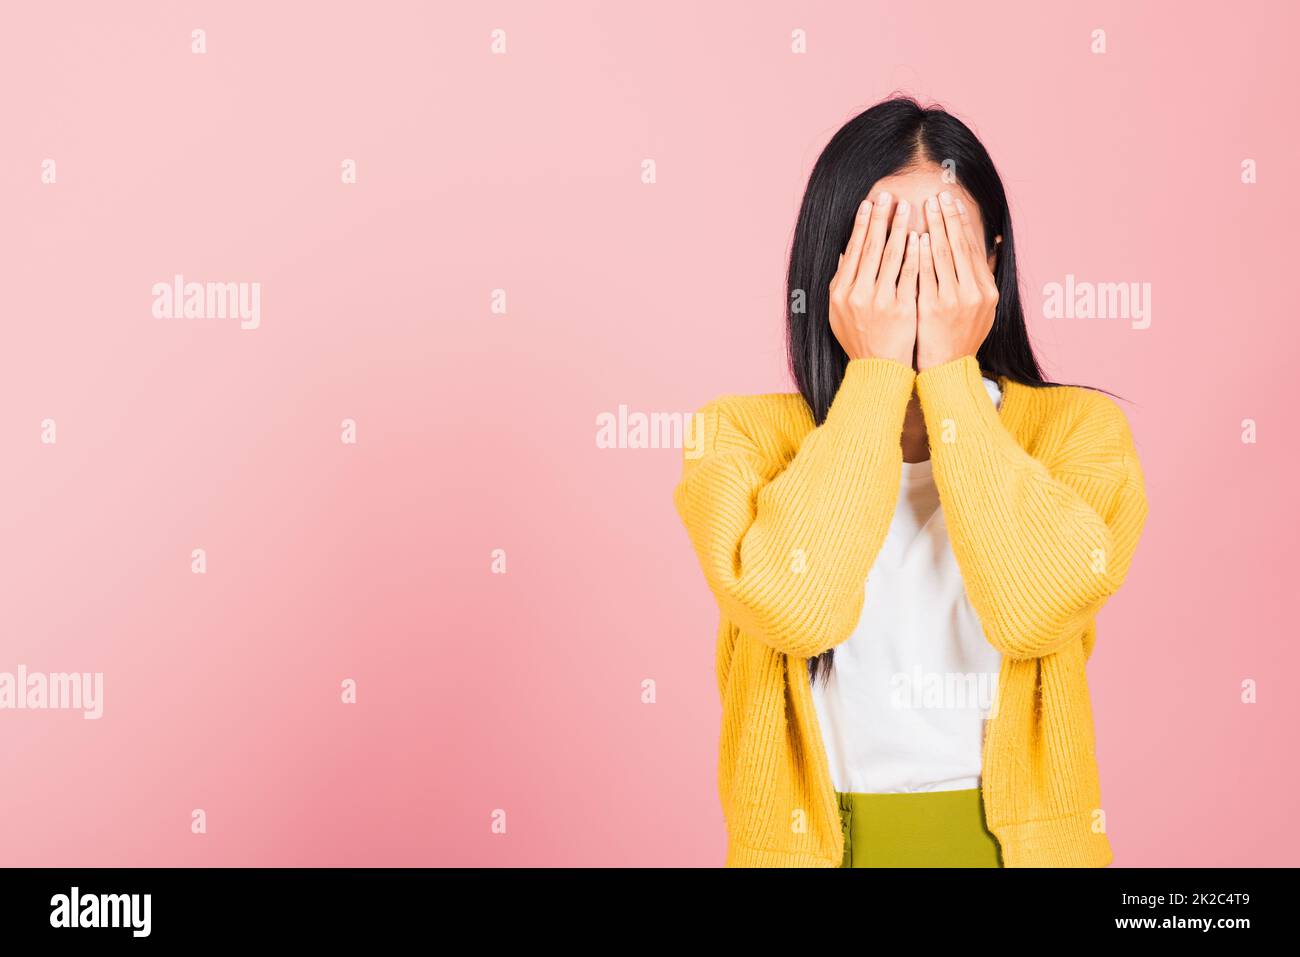 young woman in depressed bad mood her cry close face by hands Stock Photo